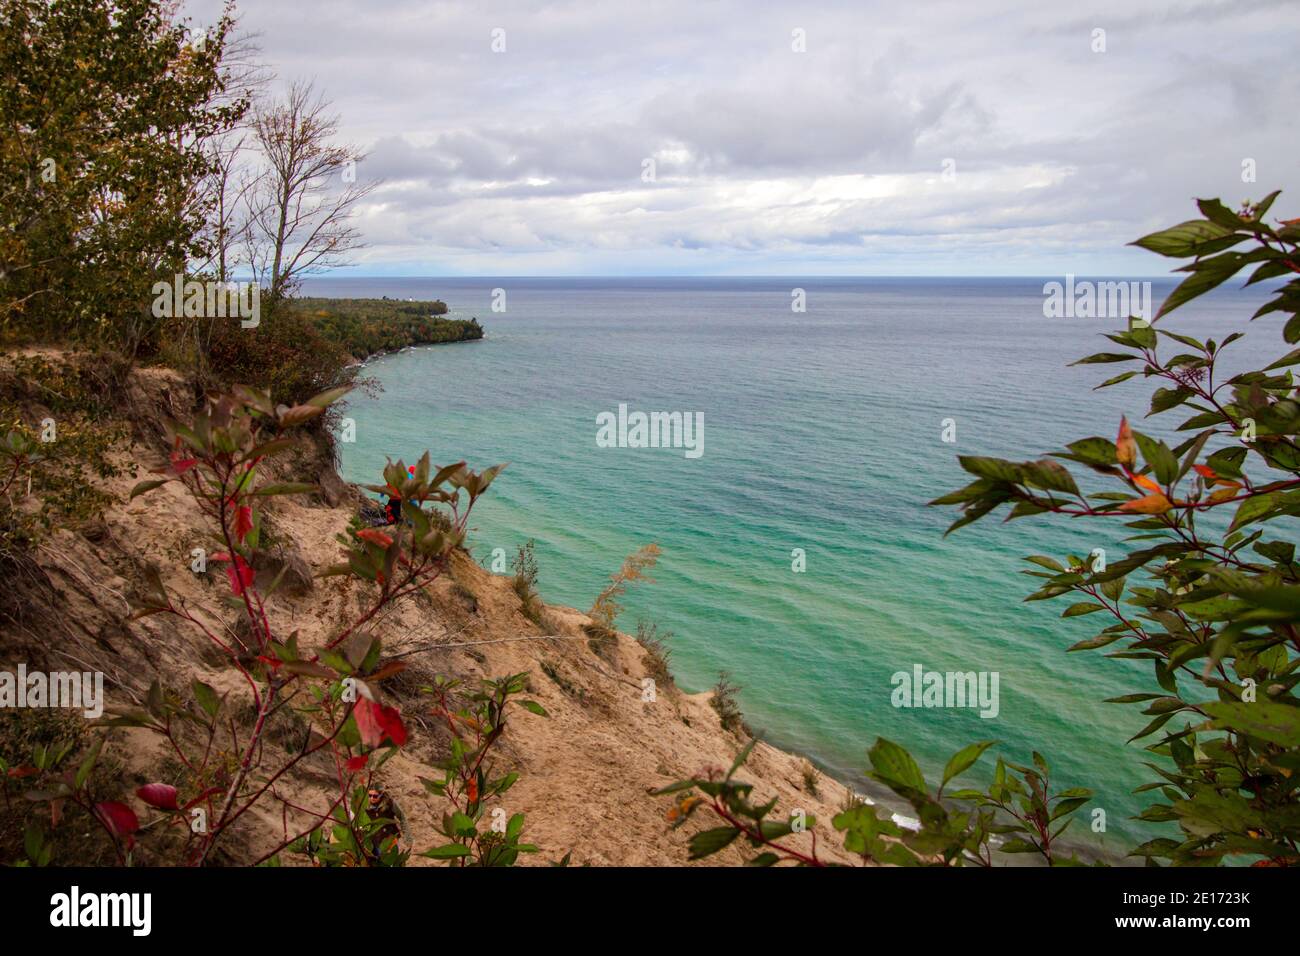 Autumn At Pictured Rocks National Lakeshore. Massive sand dune forms a large cliff on the coast of Lake Superior at the popular Log Slide Overlook. Stock Photo